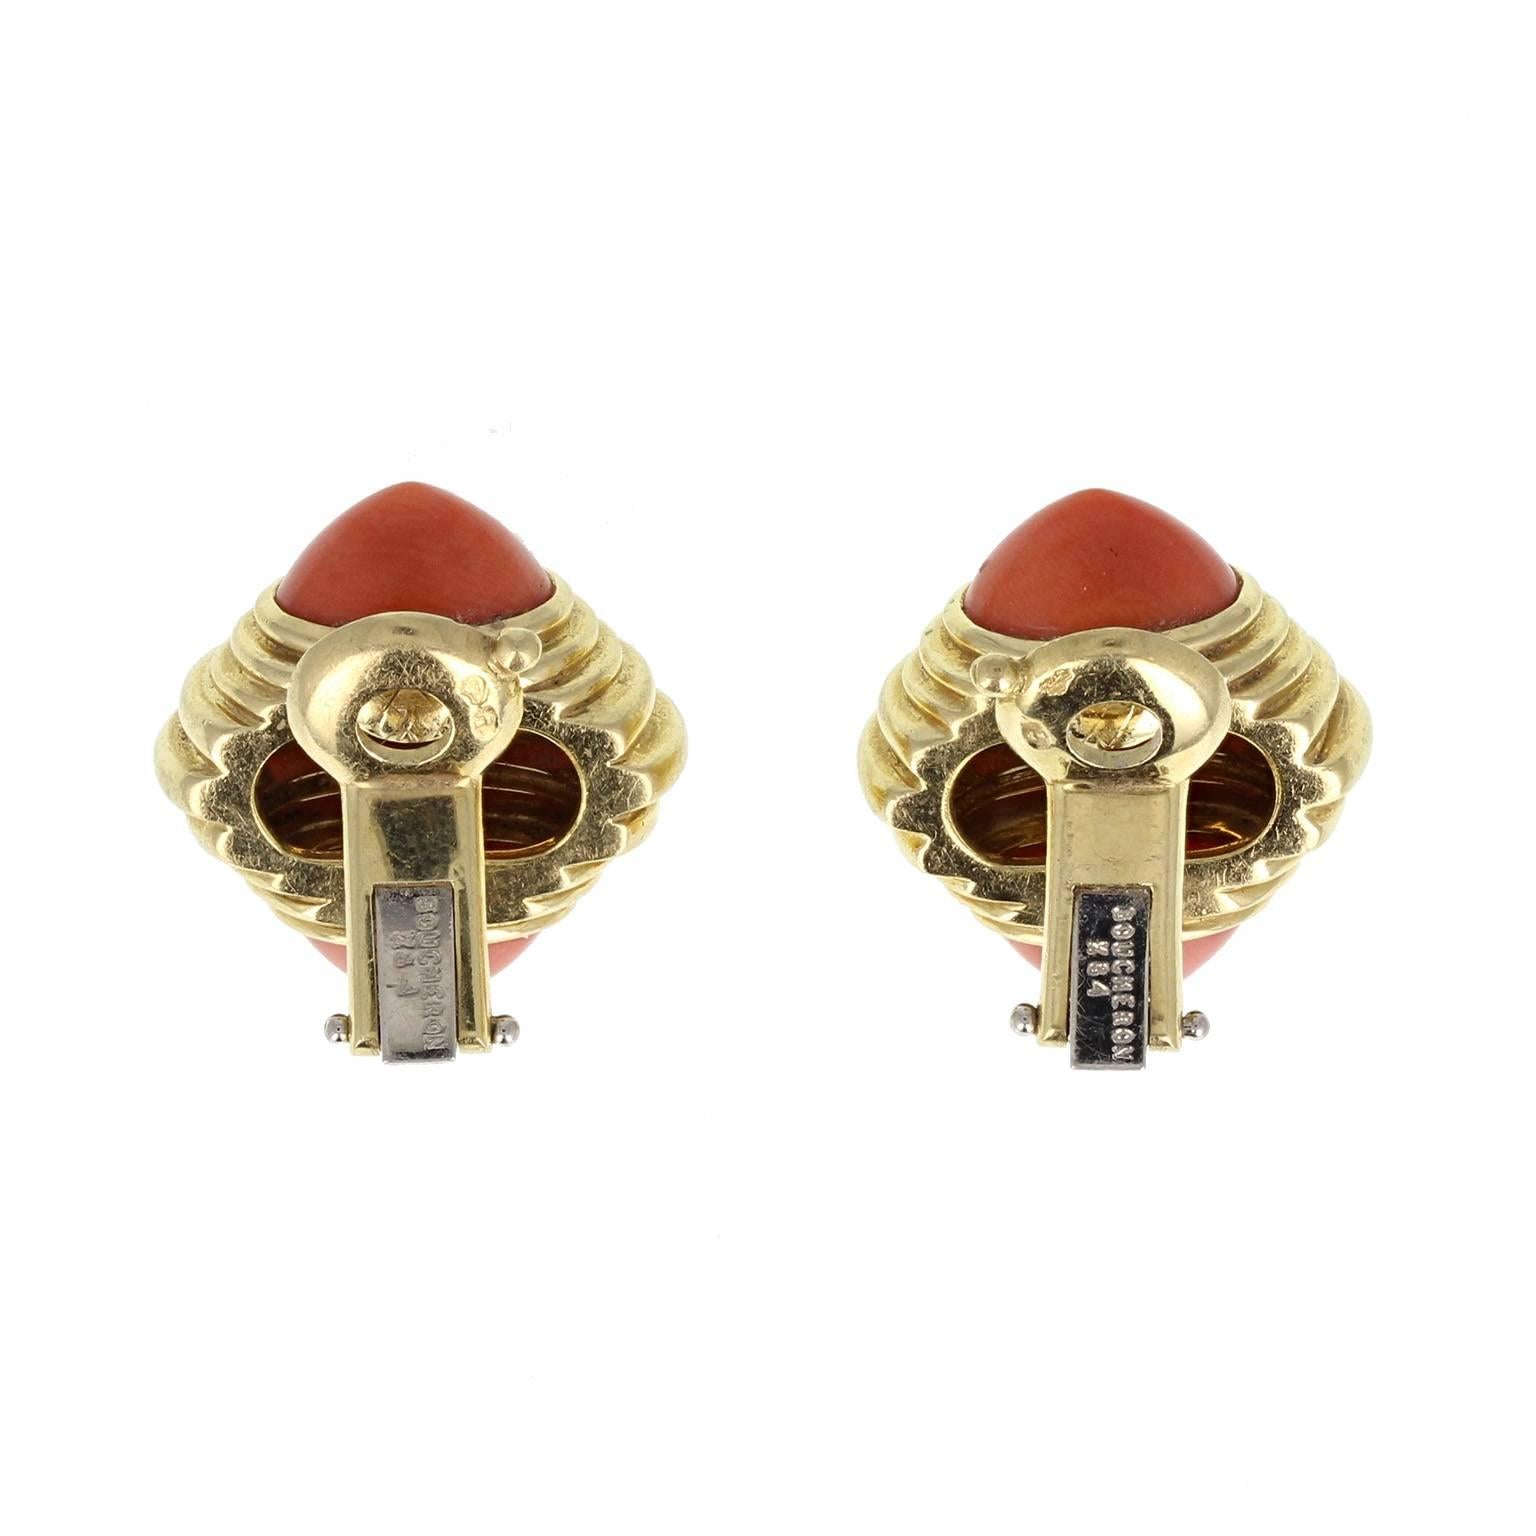 Instantly recognisable as Boucheron in style, these retro styled ear clips can be worn by those with or without pierced ears. The ridged central gold section tapering to a pink coral pyramid shaped cabochon to the top and bottom of each earring.